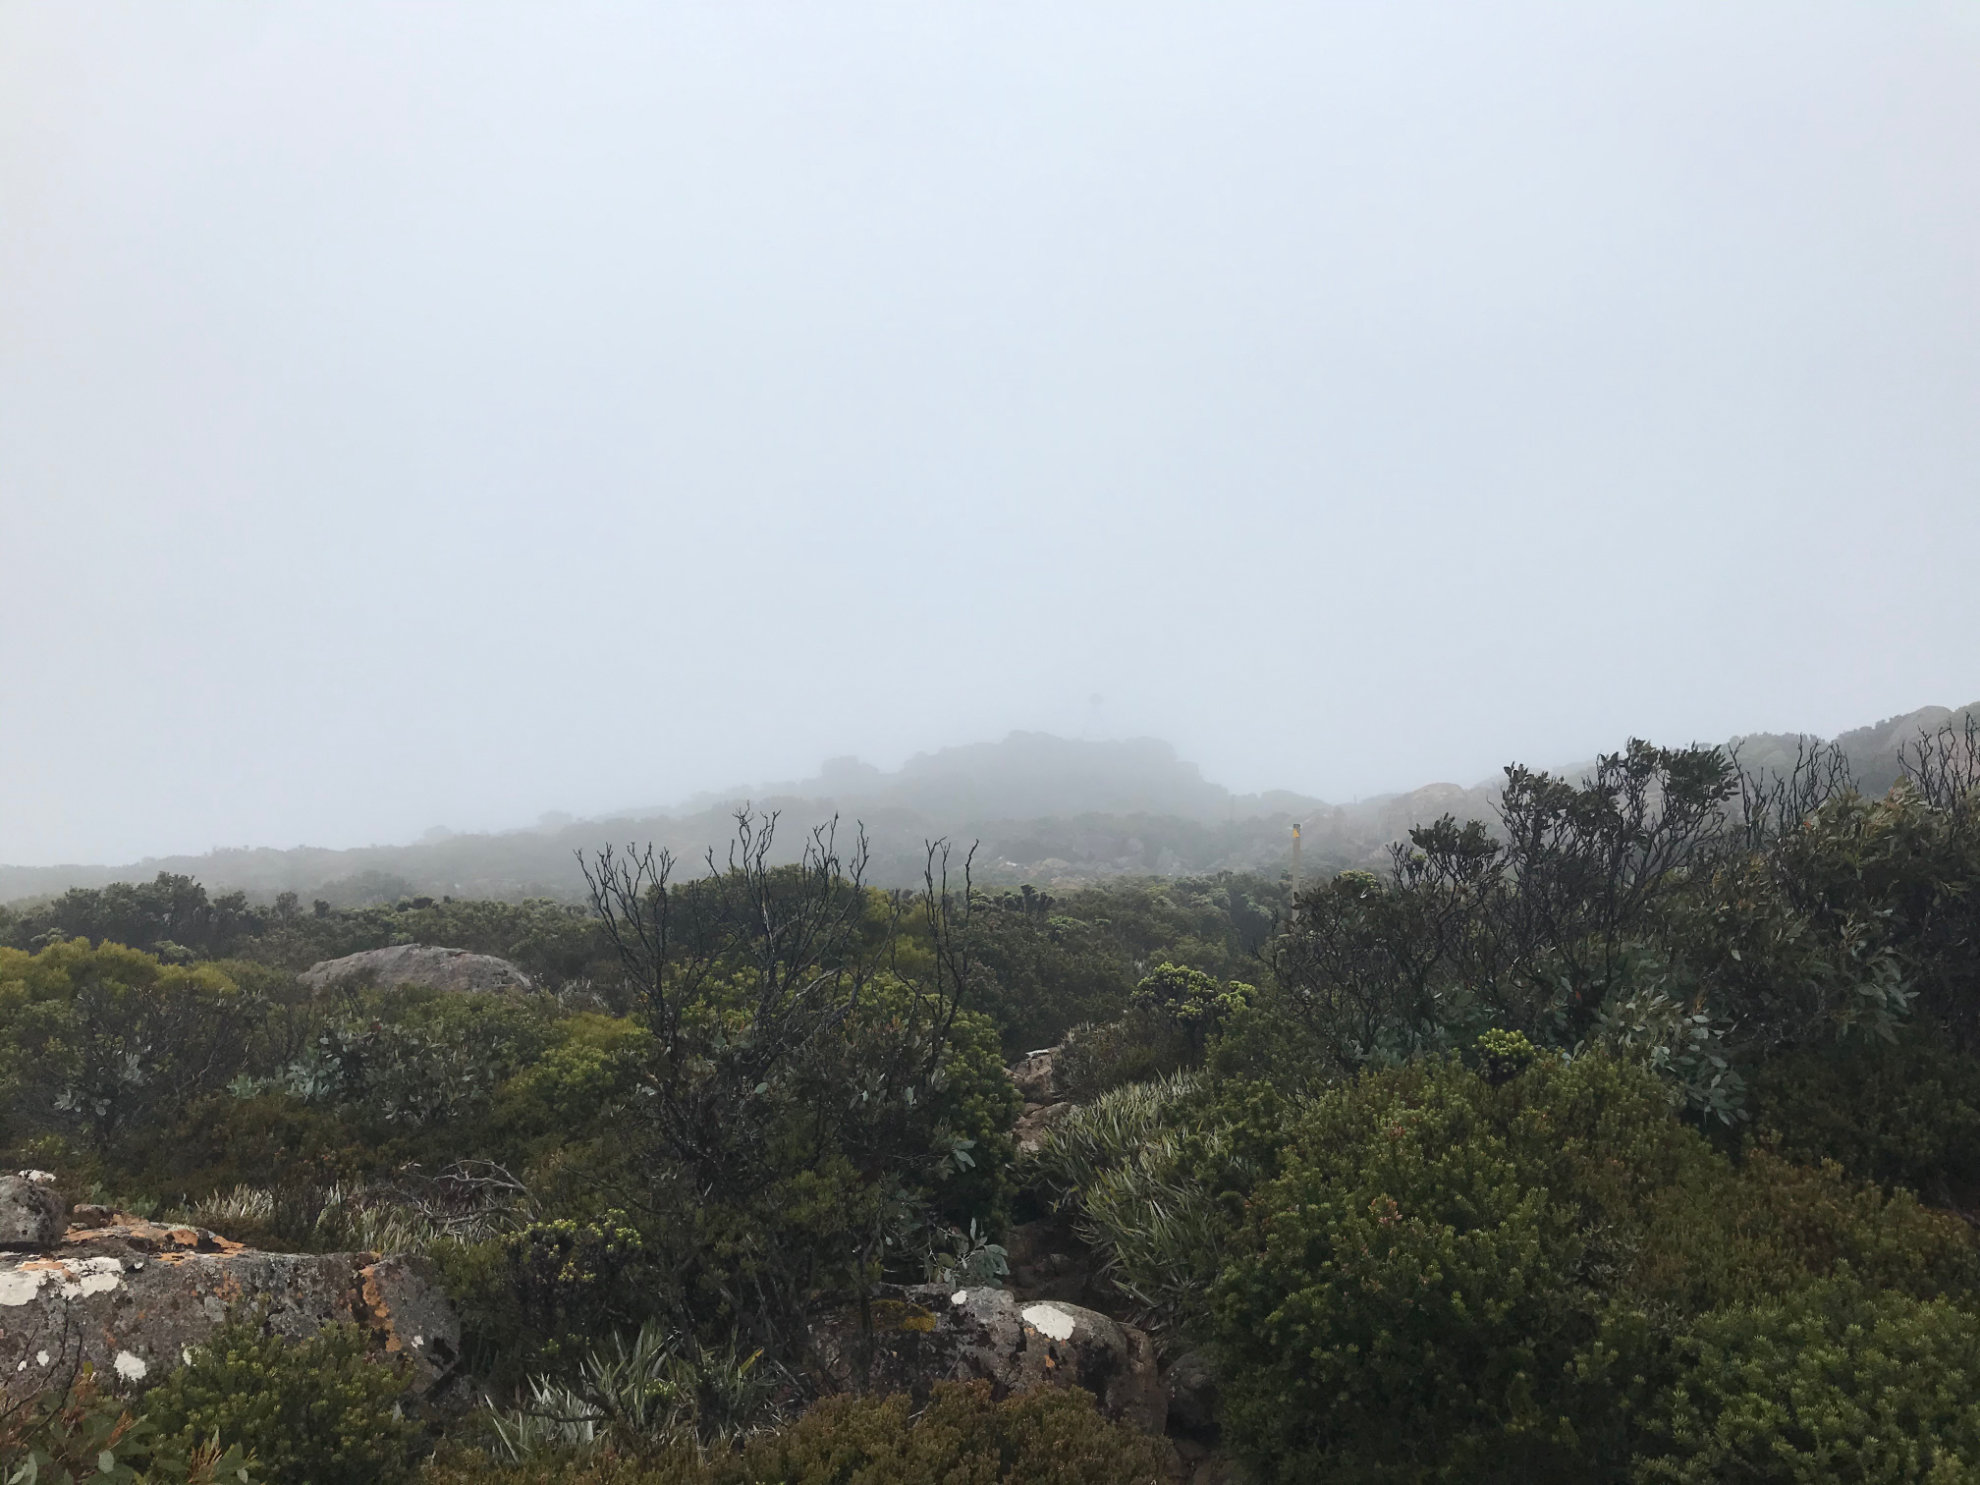 A view across bushland, with lots of cloud obscuring a mountain.